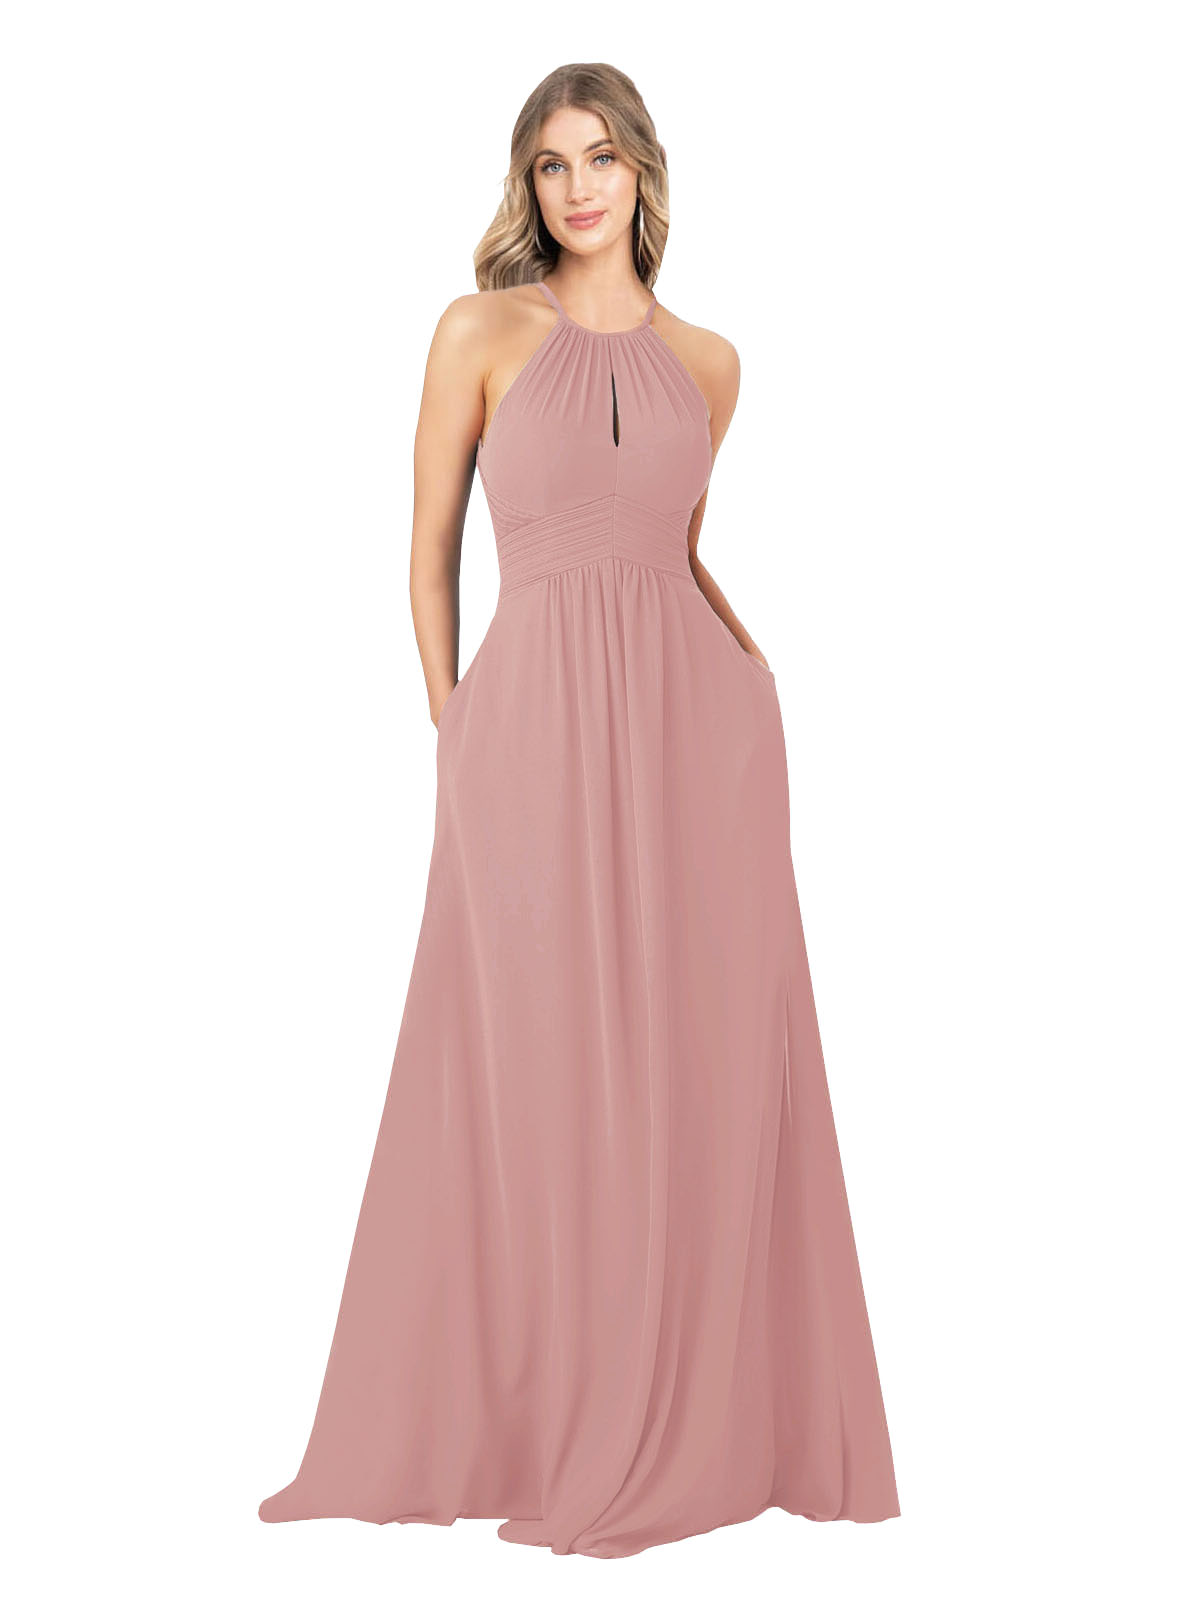 Dusty Pink A-Line High Neck Sleeveless Long Bridesmaid Dress Cassiopeia